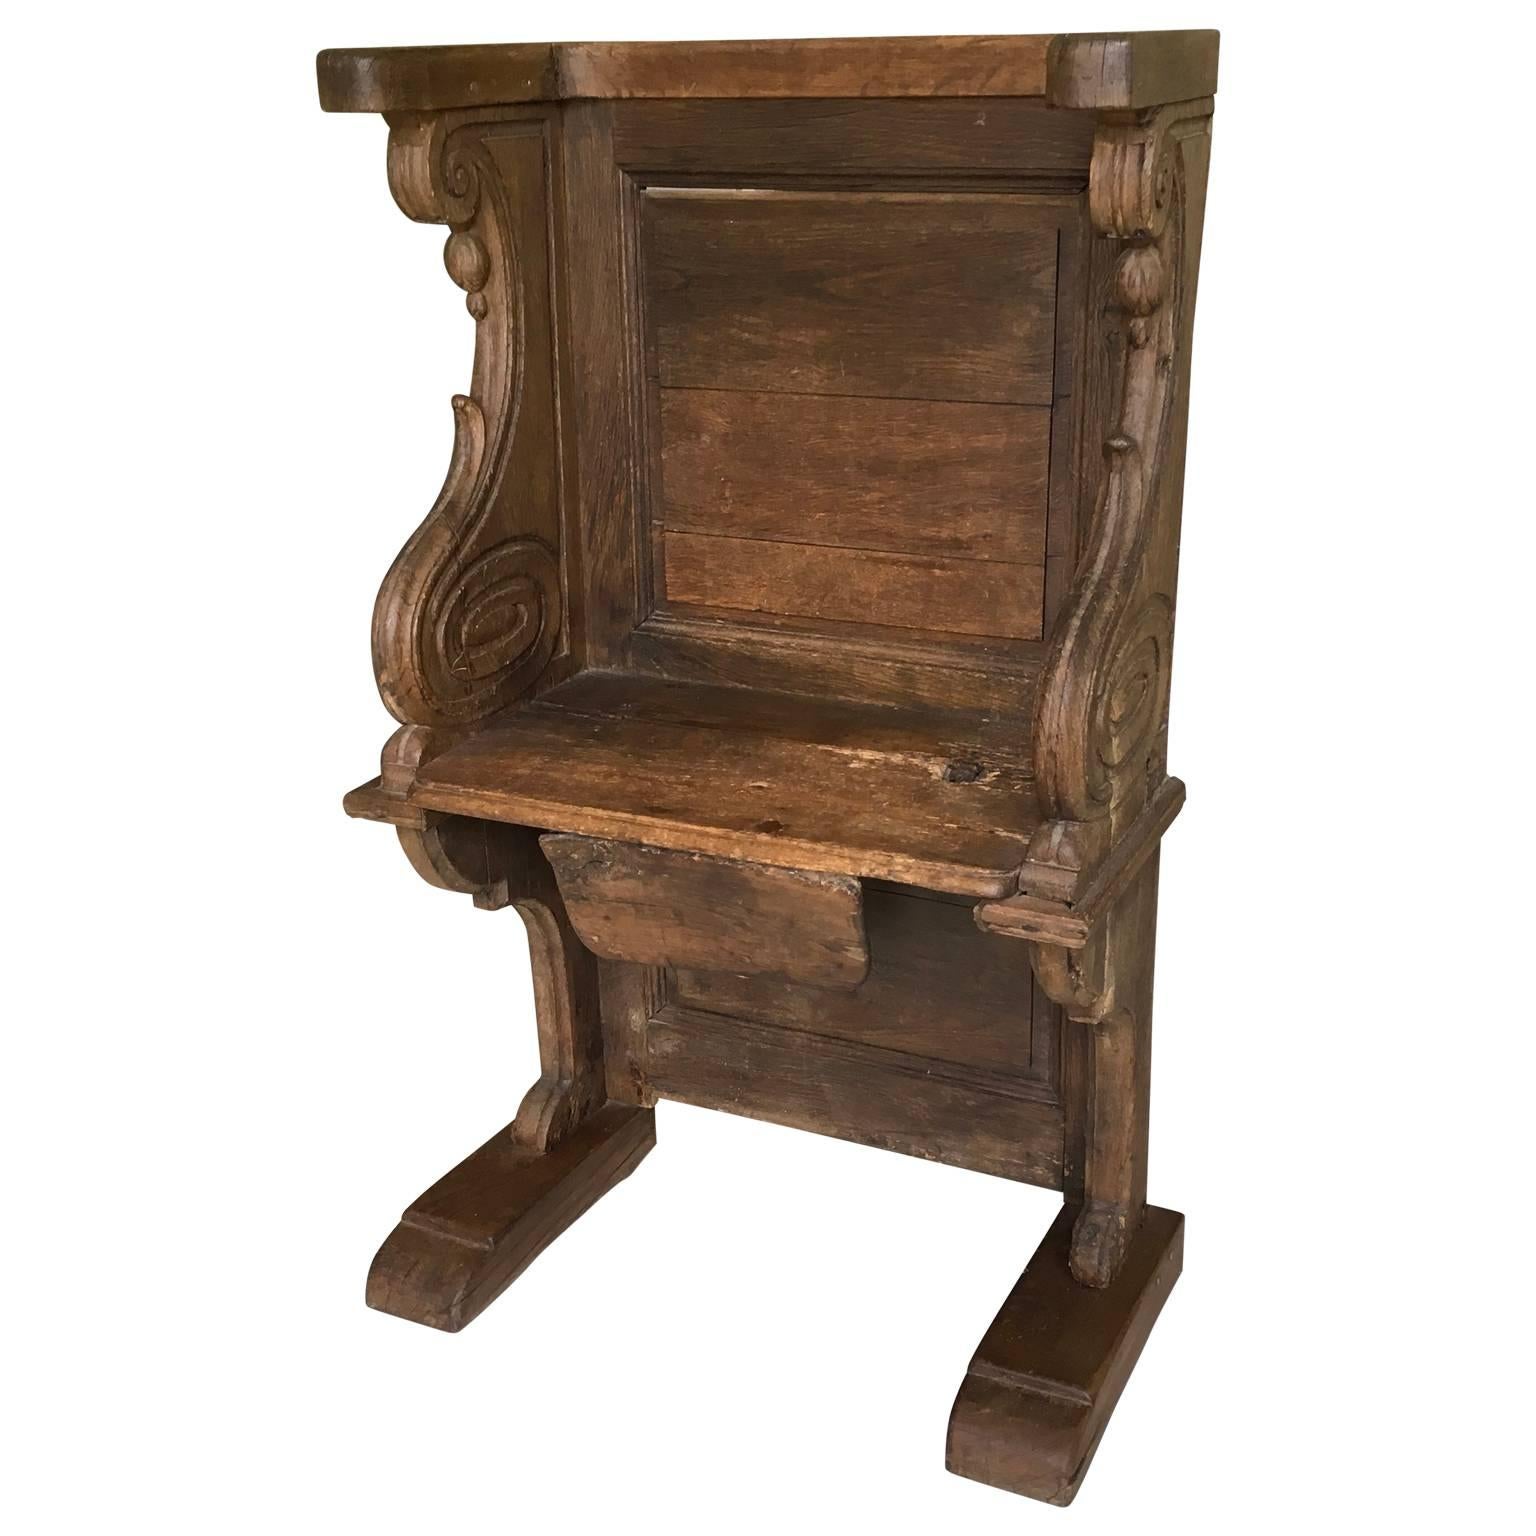 Gothic Medieval cathedral oak Misericord bench, circa 15th-17th Centuries. This beautiful small bench or chair stall was often found in Medieval Cathedrals and churches attached to collegiate or Monastic and charitable institutions. Seat can be